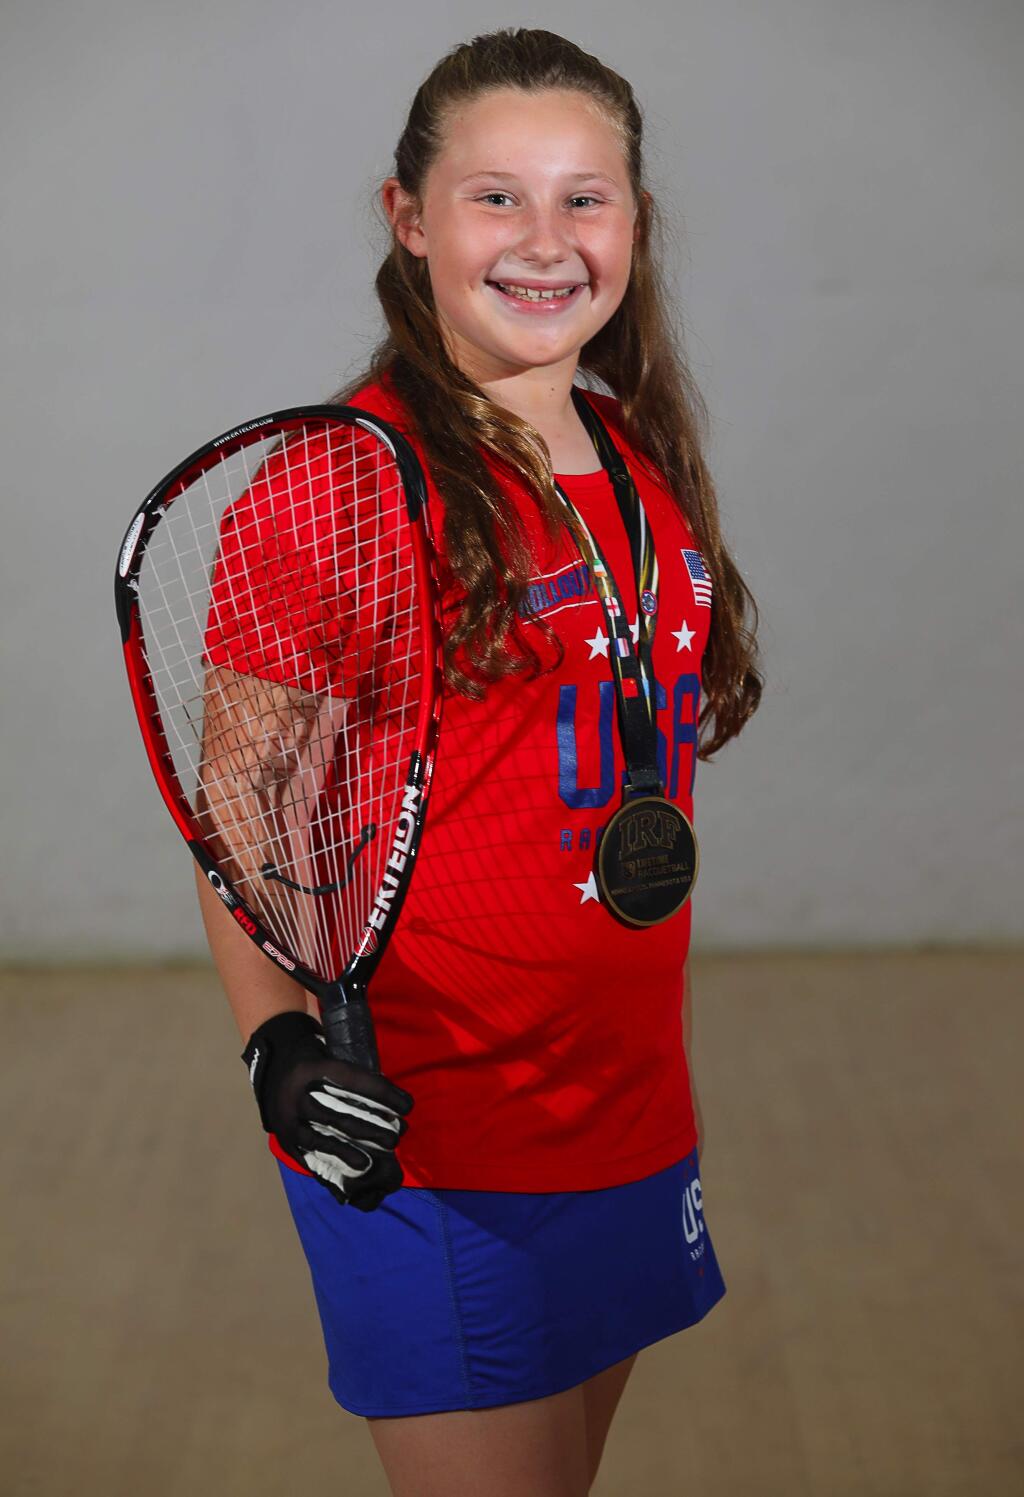 Ava Naworski won the 10 and under doubles title at the Junior World Raquetball Championships, in Minnesota.(Christopher Chung/ The Press Democrat)